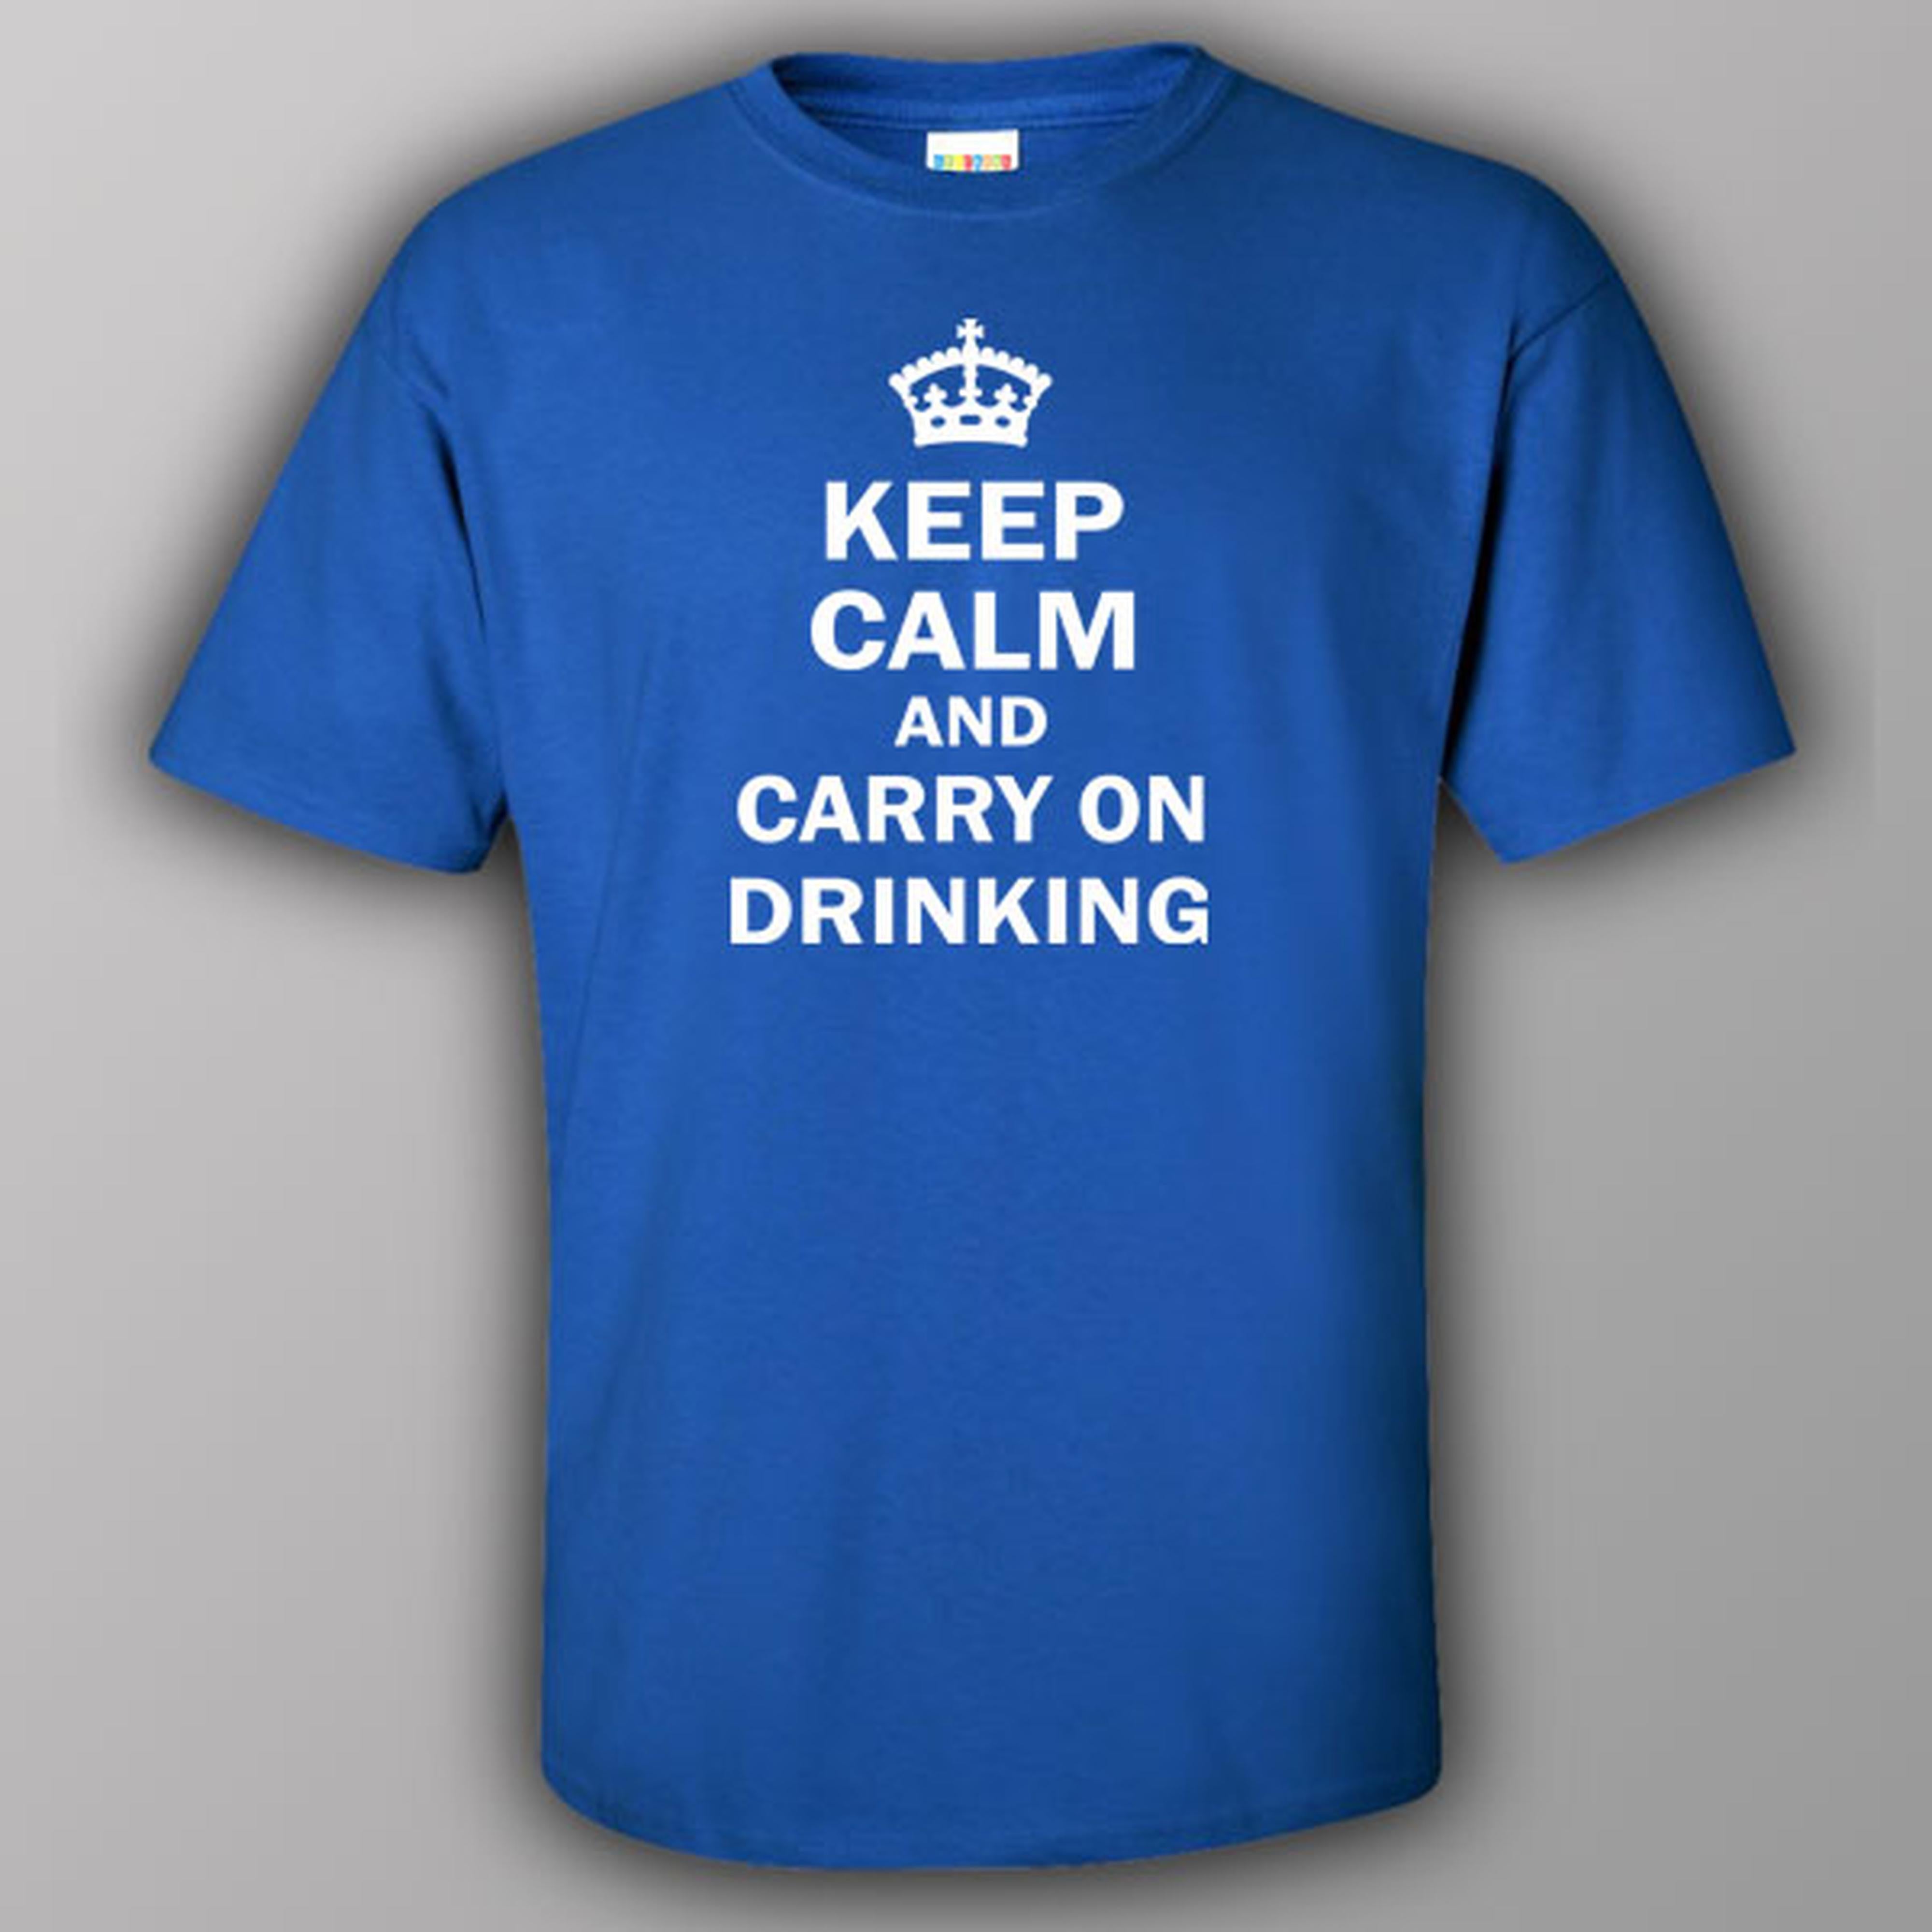 keep-calm-and-carry-on-drinking-t-shirt